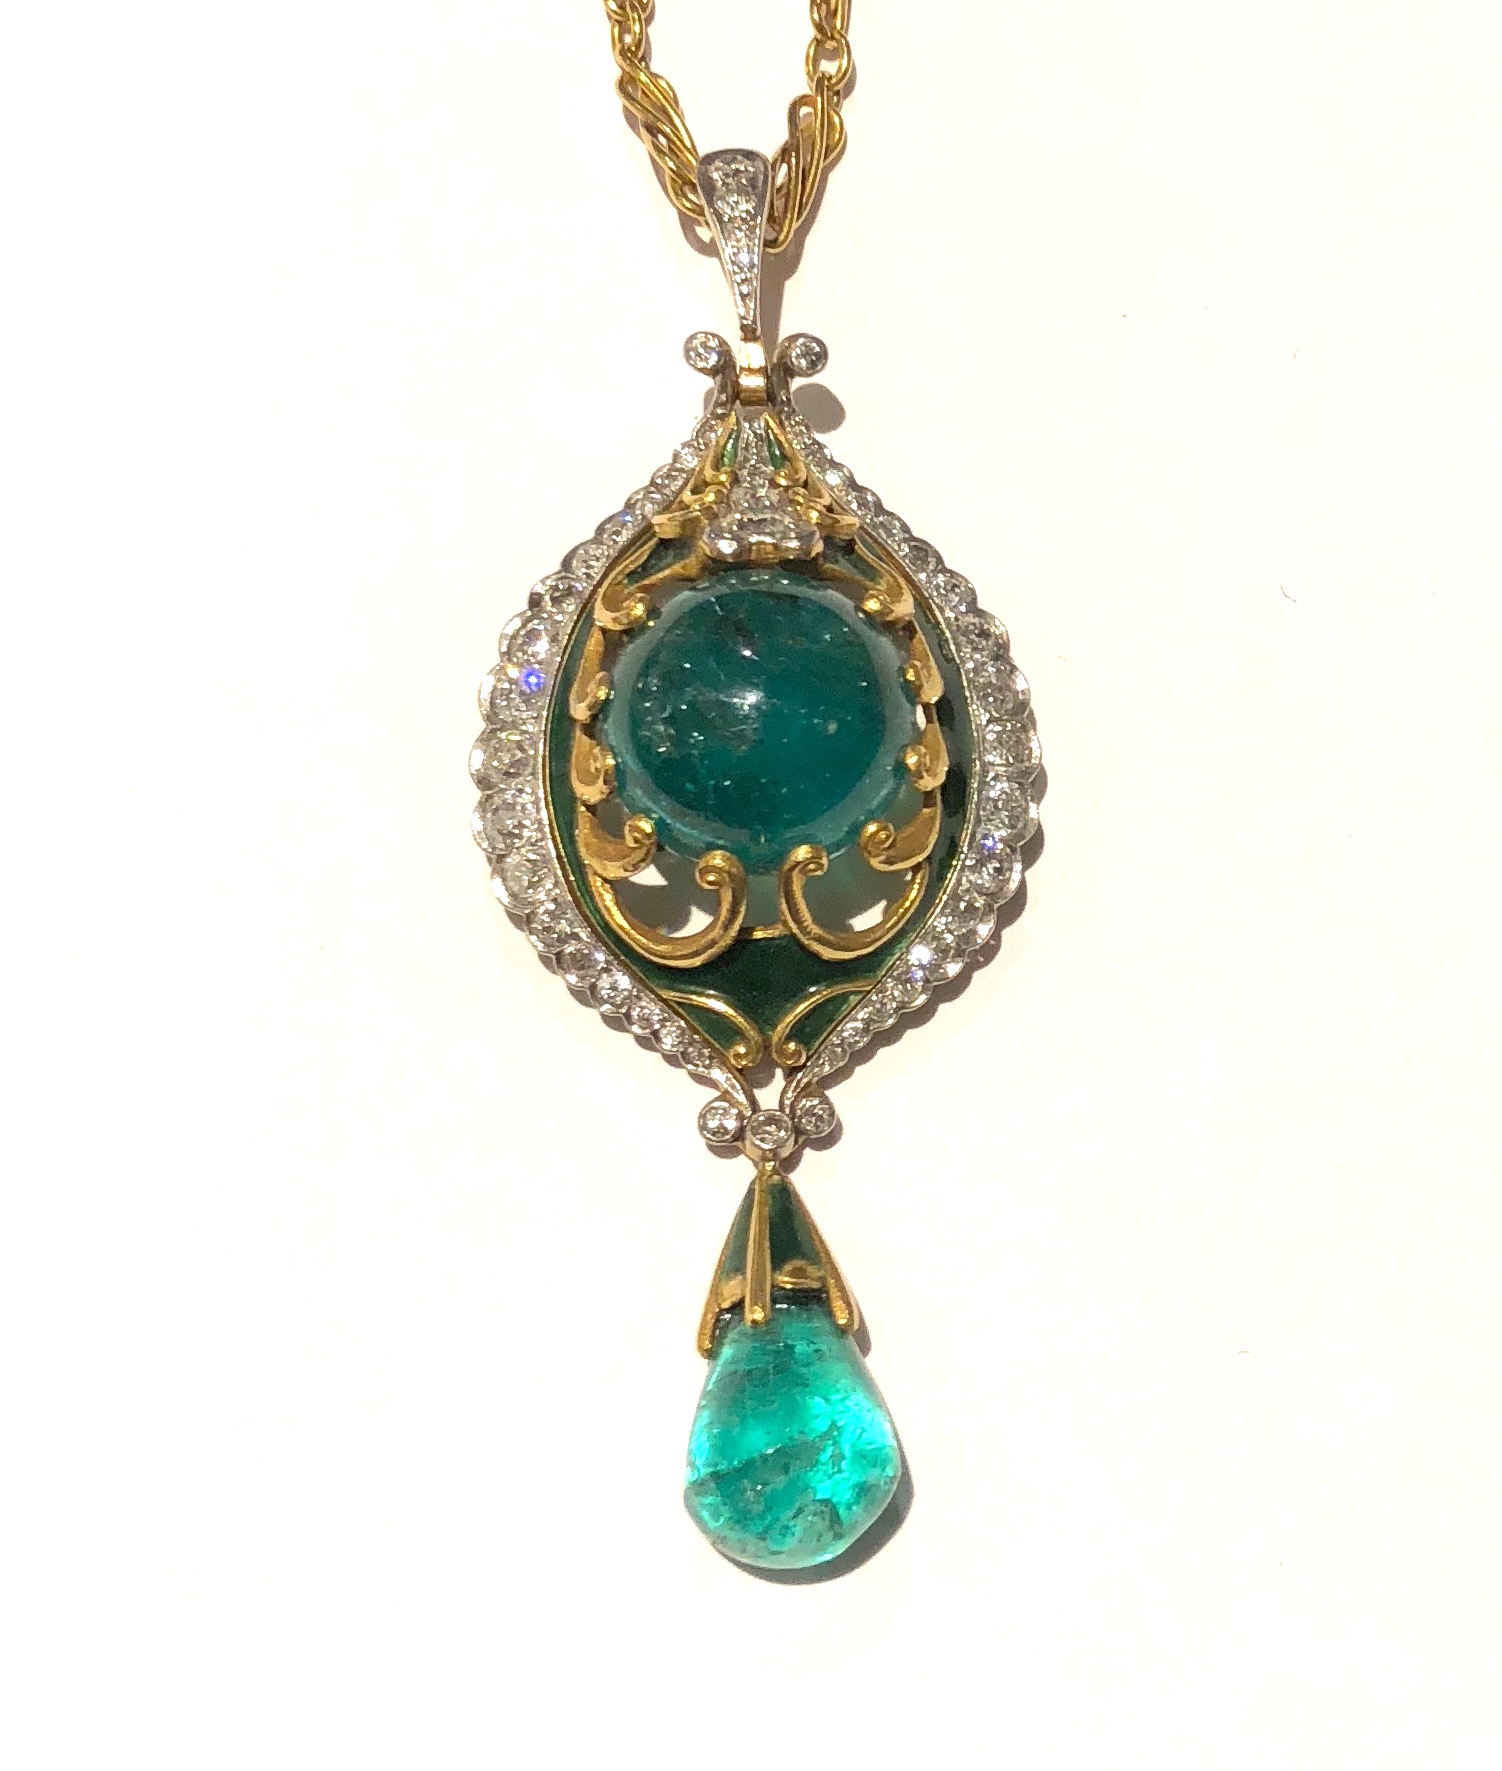 Marcus & Co Art Nouveau pendant necklace, Handwrought 18K yellow gold set with a large cabochon natural emerald center stone surrounded by green enamel details with gold looping bezel mounts and platinum topped diamond side details set with 43 diamonds, cabochon emerald pendant drop with a green enamel and gold capped top, signed, c. 1900